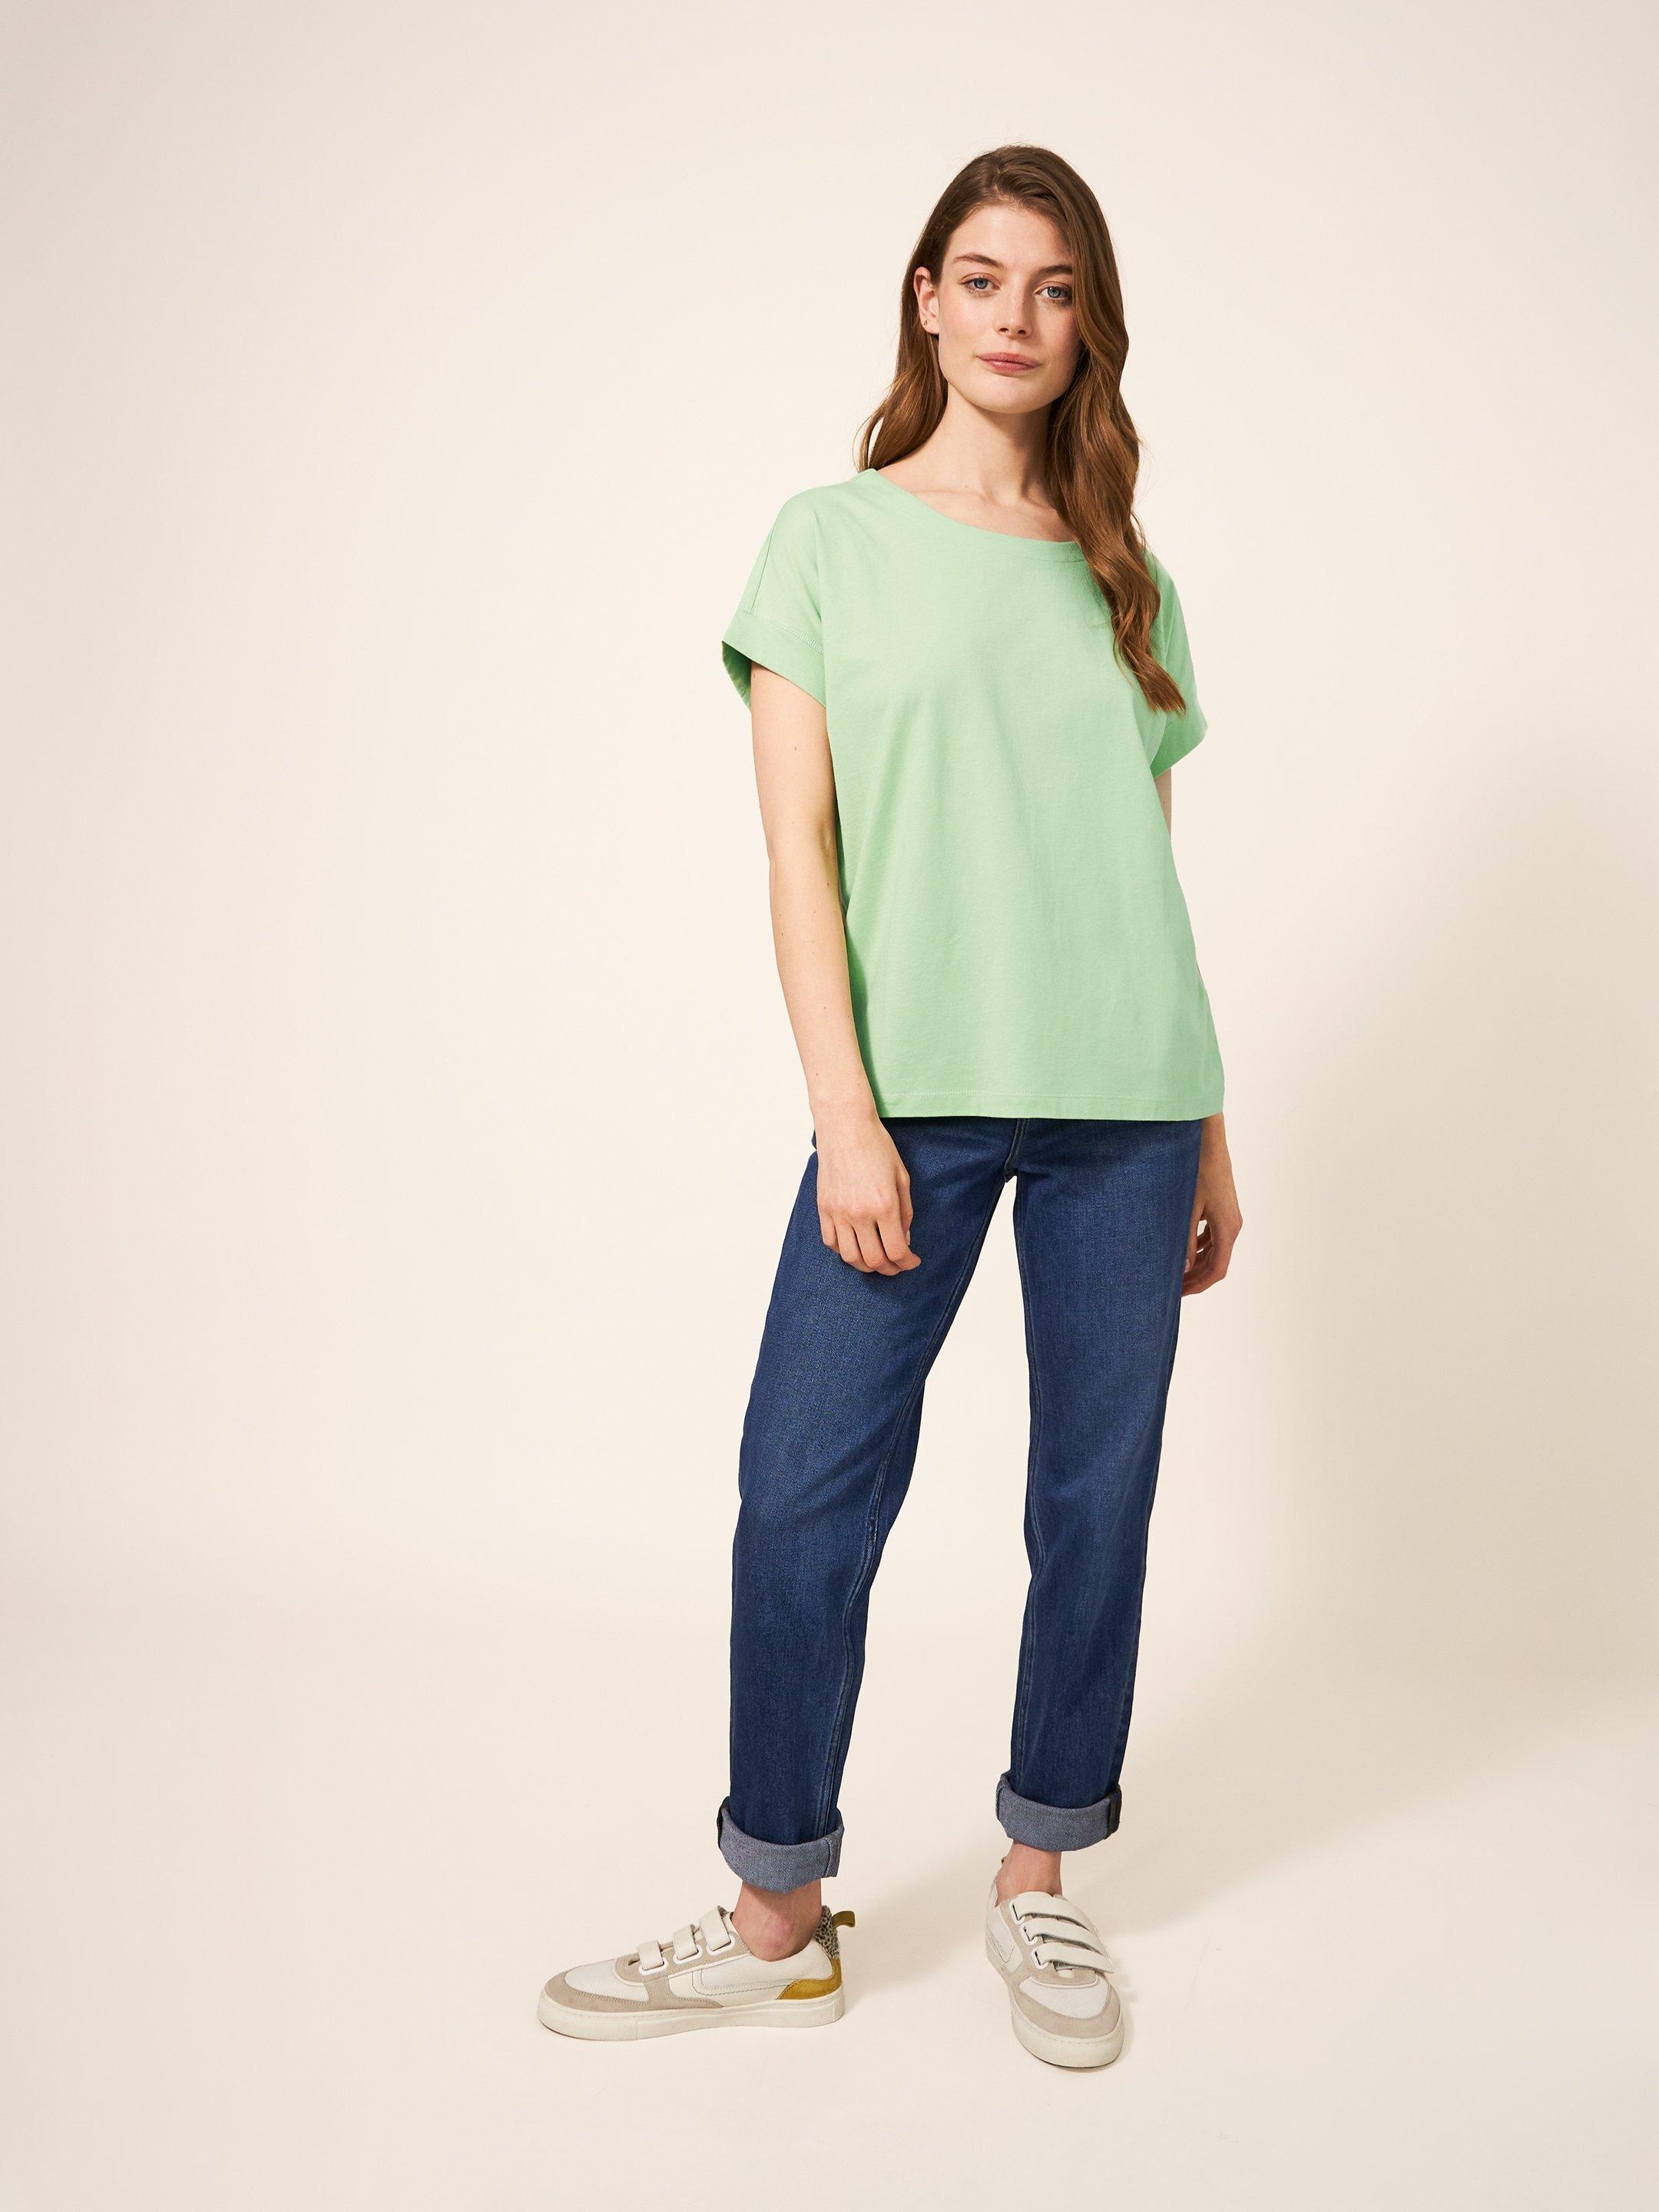 Urban Tee in MID GREEN - MODEL FRONT